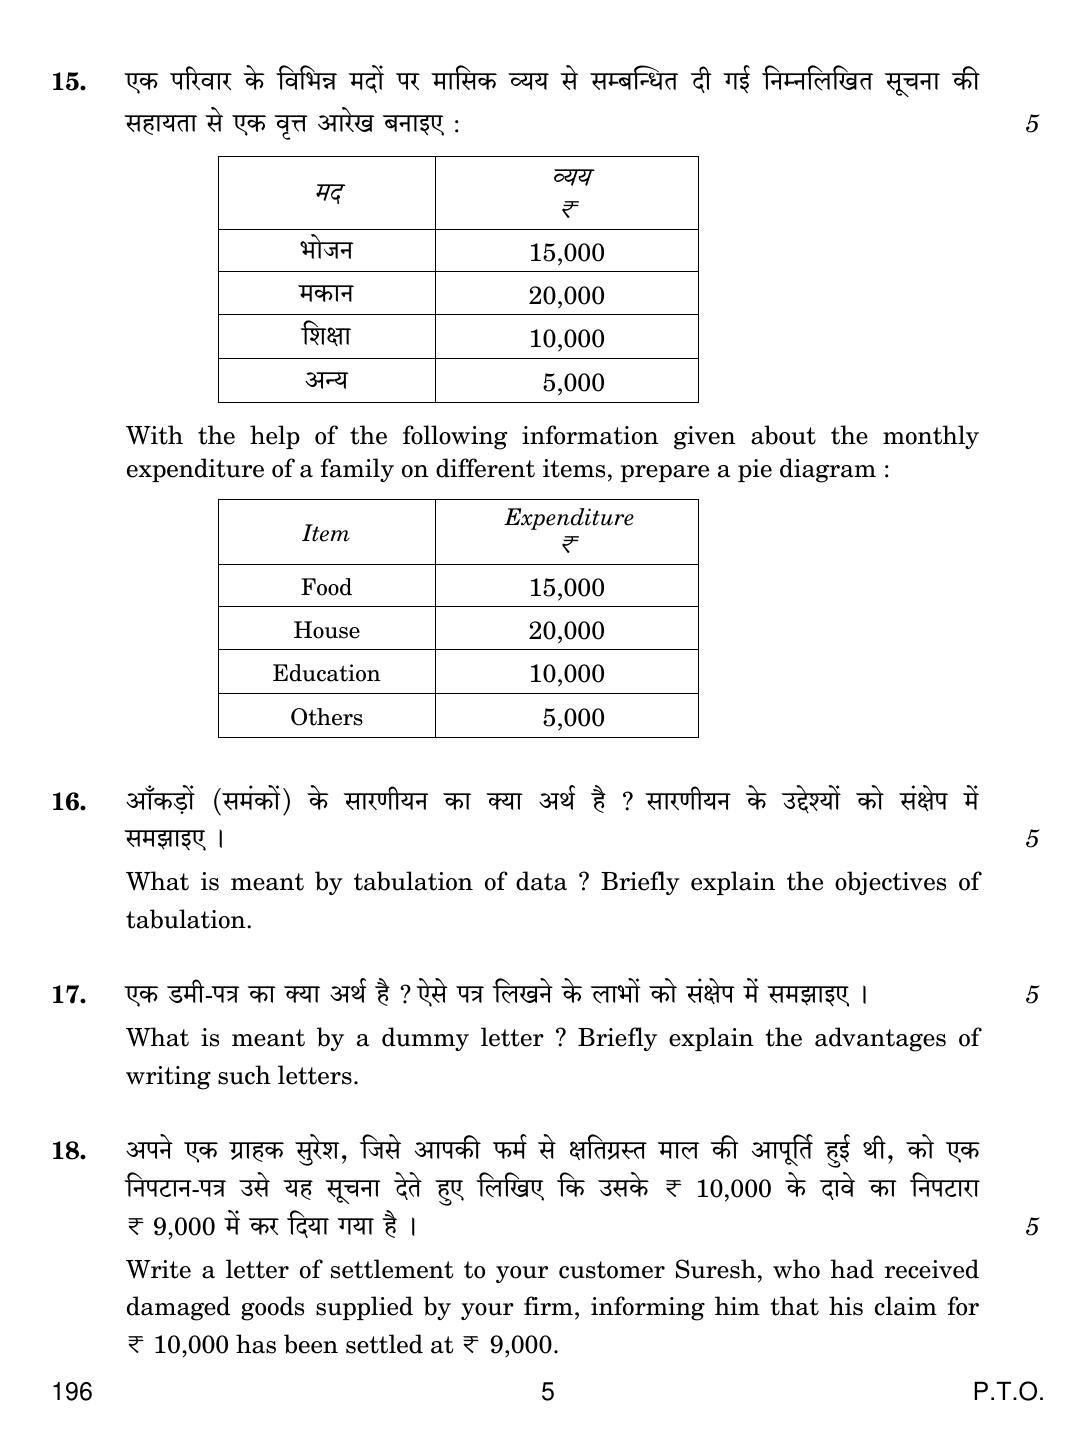 CBSE Class 12 196 OFFICE COMMUNICATION 2018 Question Paper - Page 5